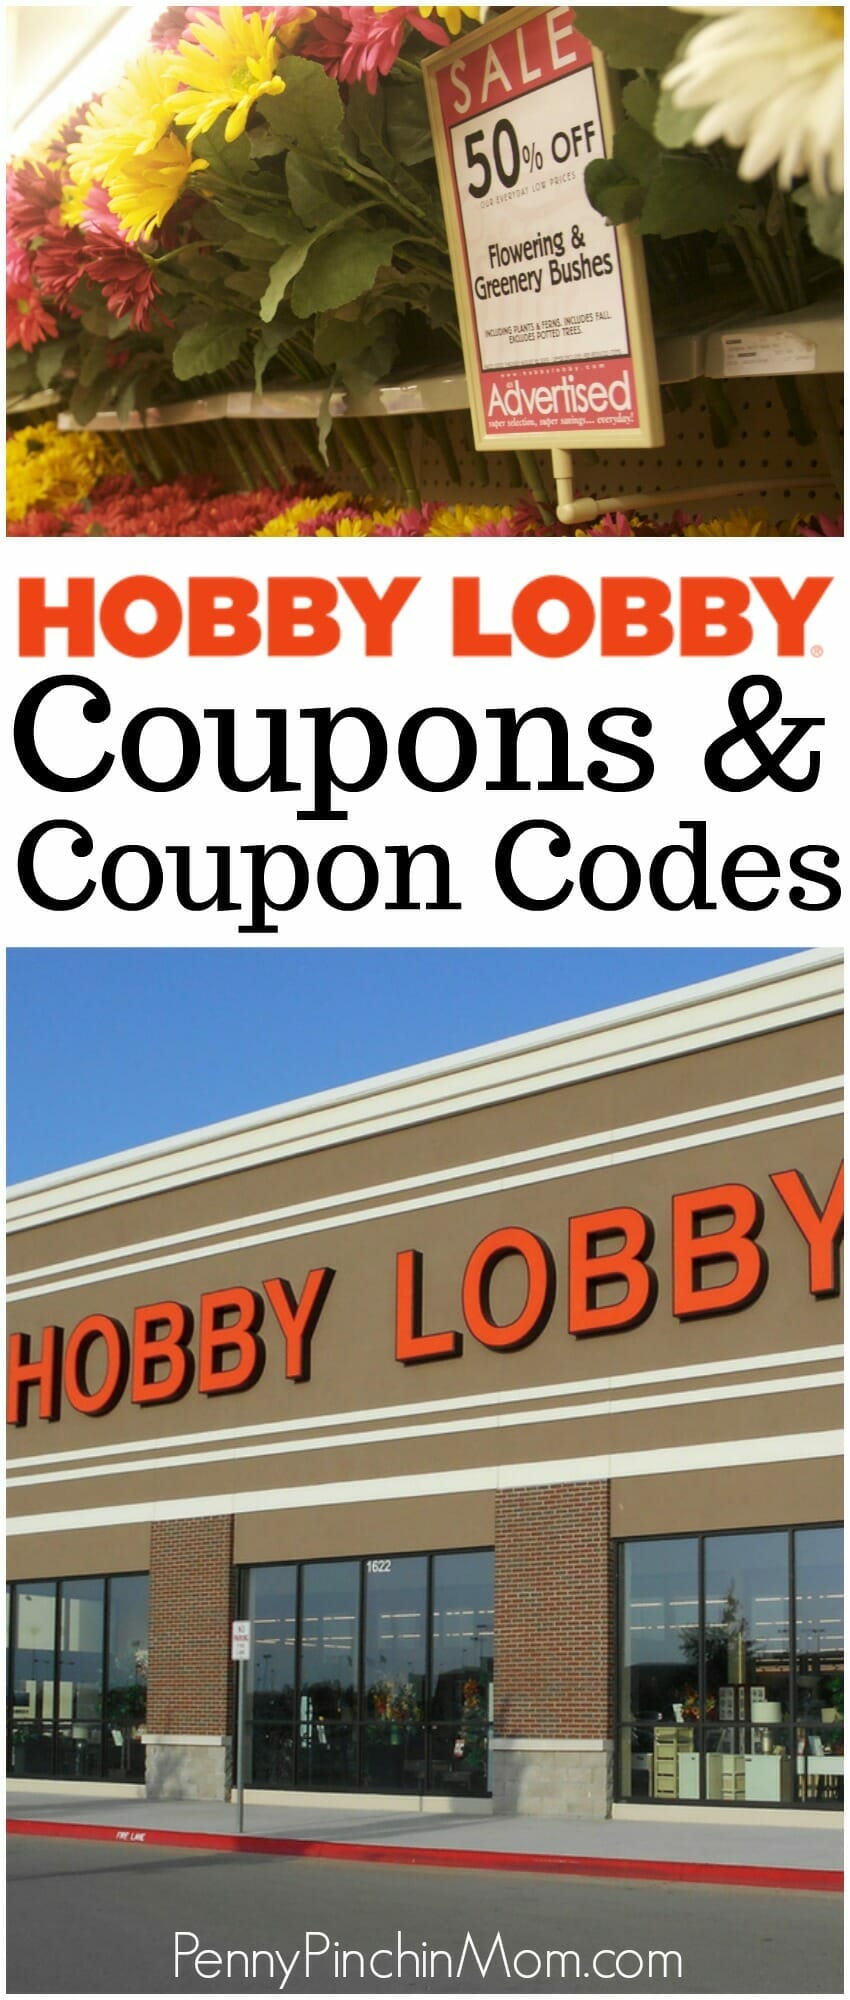 Hobby Lobby Coupons and Coupon Codes